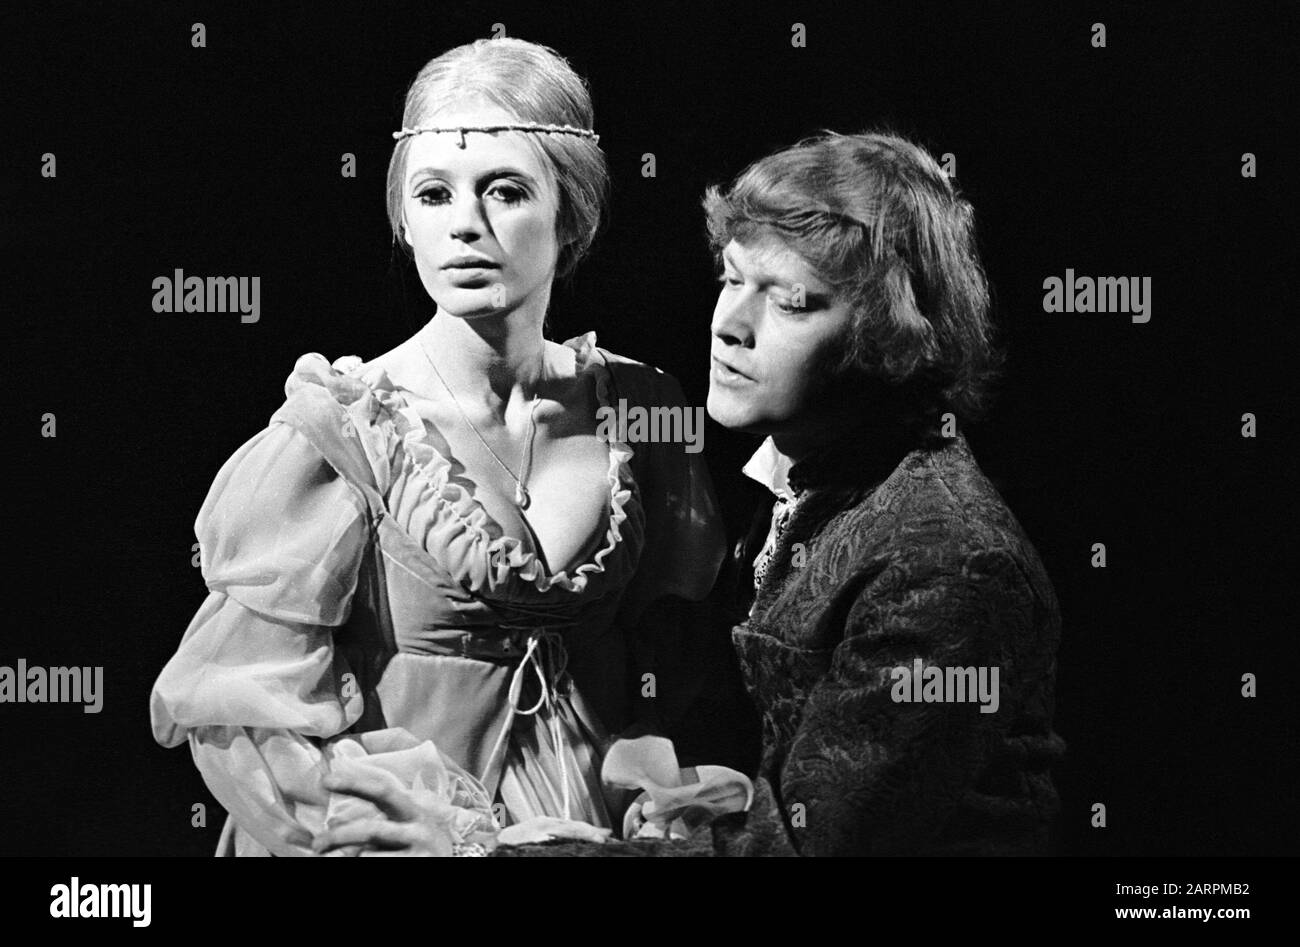 Marianne Faithfull as Ophelia, with Michael Pennington as Laertes, in HAMLET by Shakespeare directed by Tony Richardson at the Roundhouse, London in 1969. Marianne Faithfull, English singer, songwriter and actress, born 29 December 1946 in Hampstead, London. Stock Photo